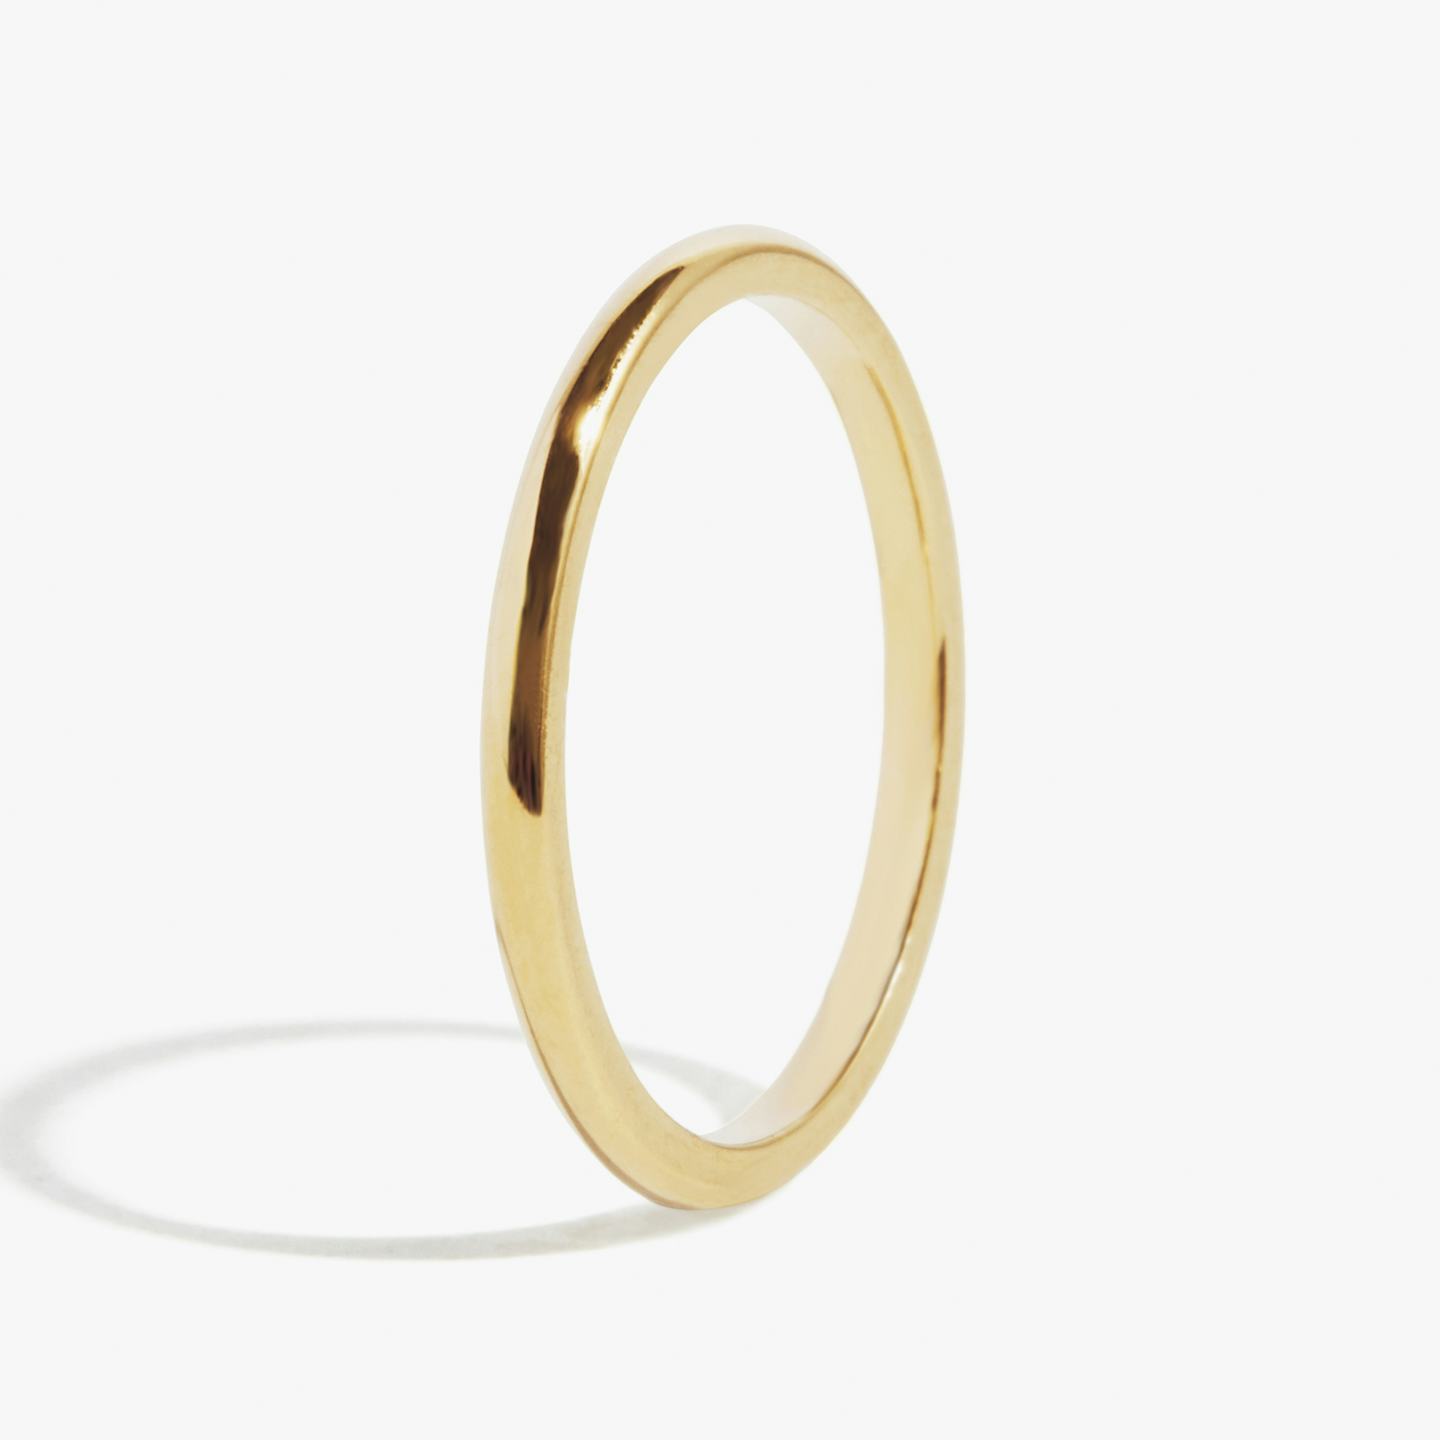 The Round | 18k | 18k Yellow Gold | Band width: Small - 1.5mm